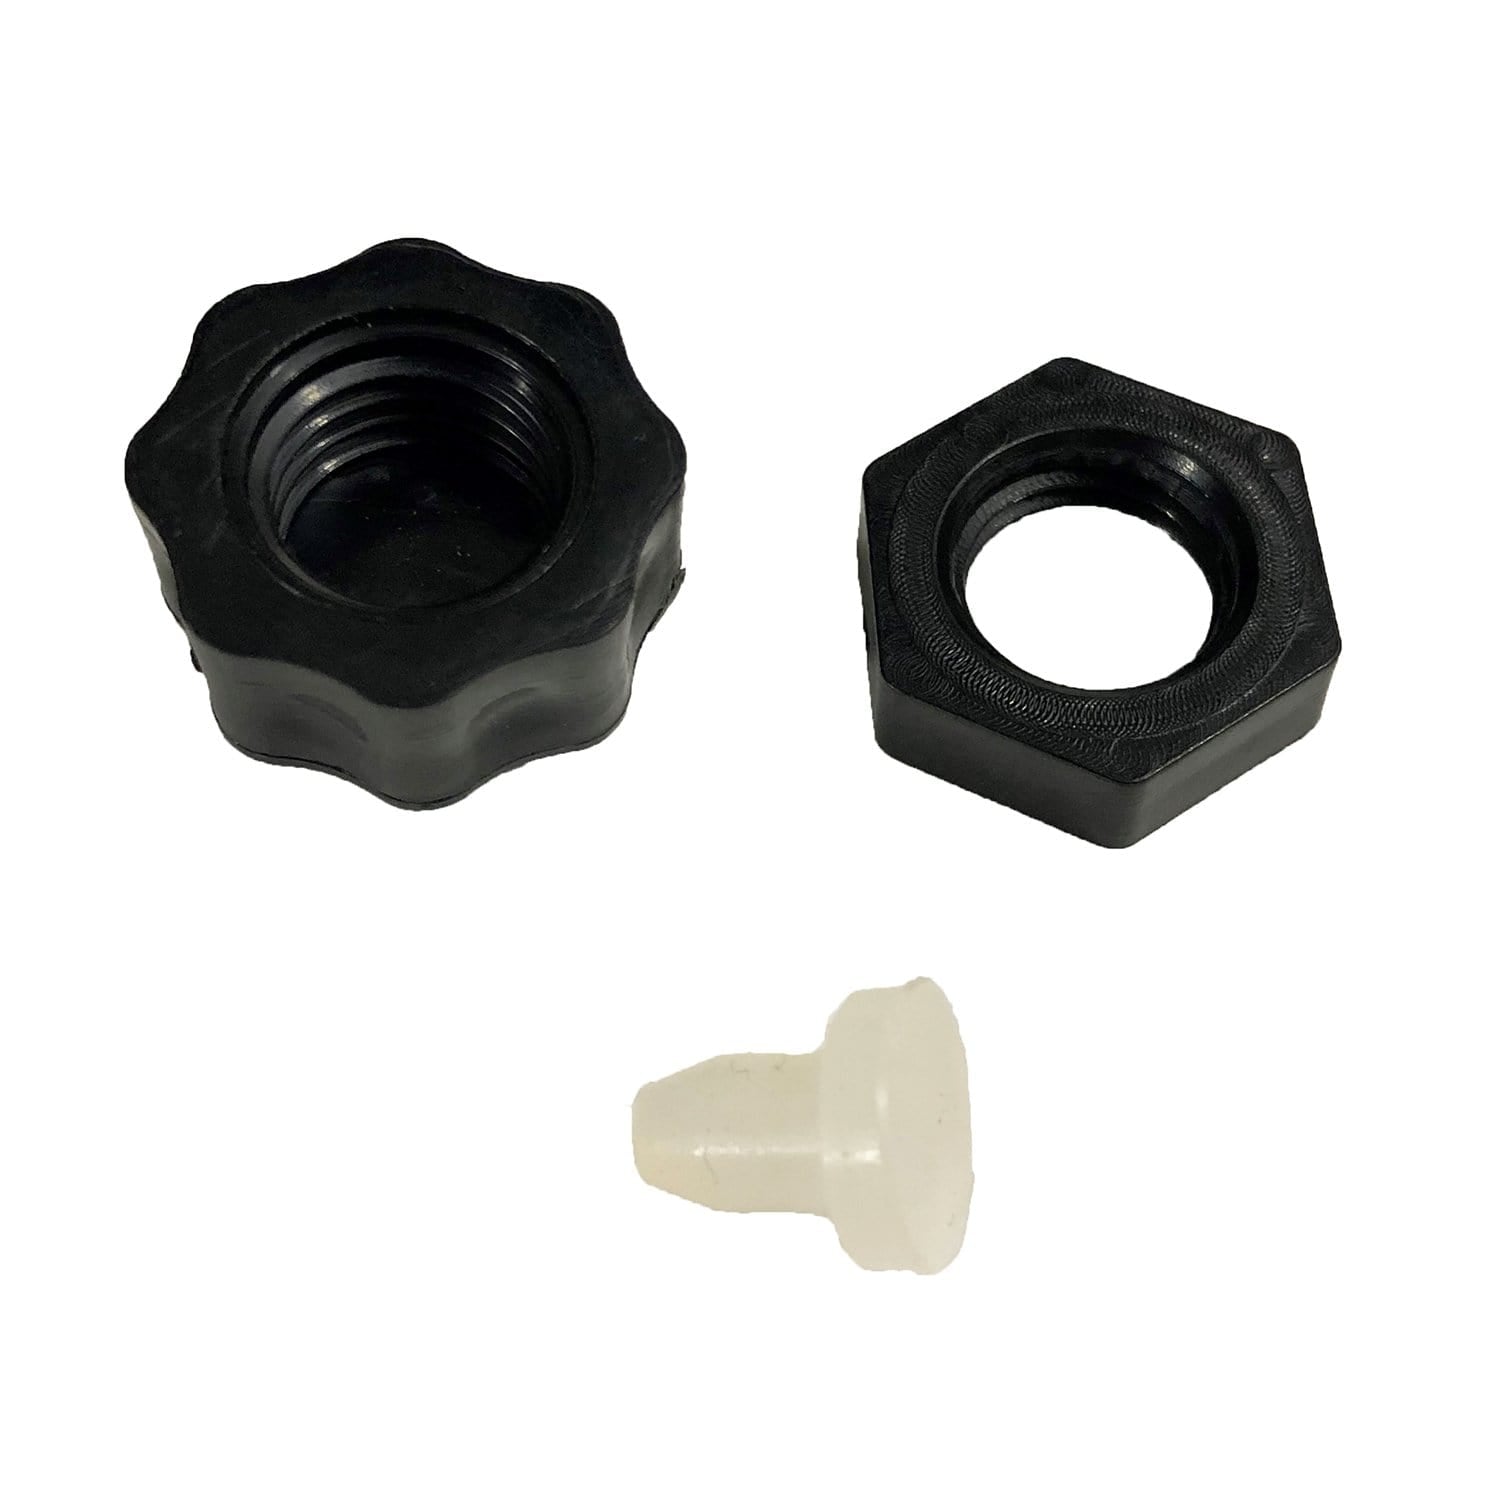 Hole Plugs - Plug Buttons : Apex Fasteners